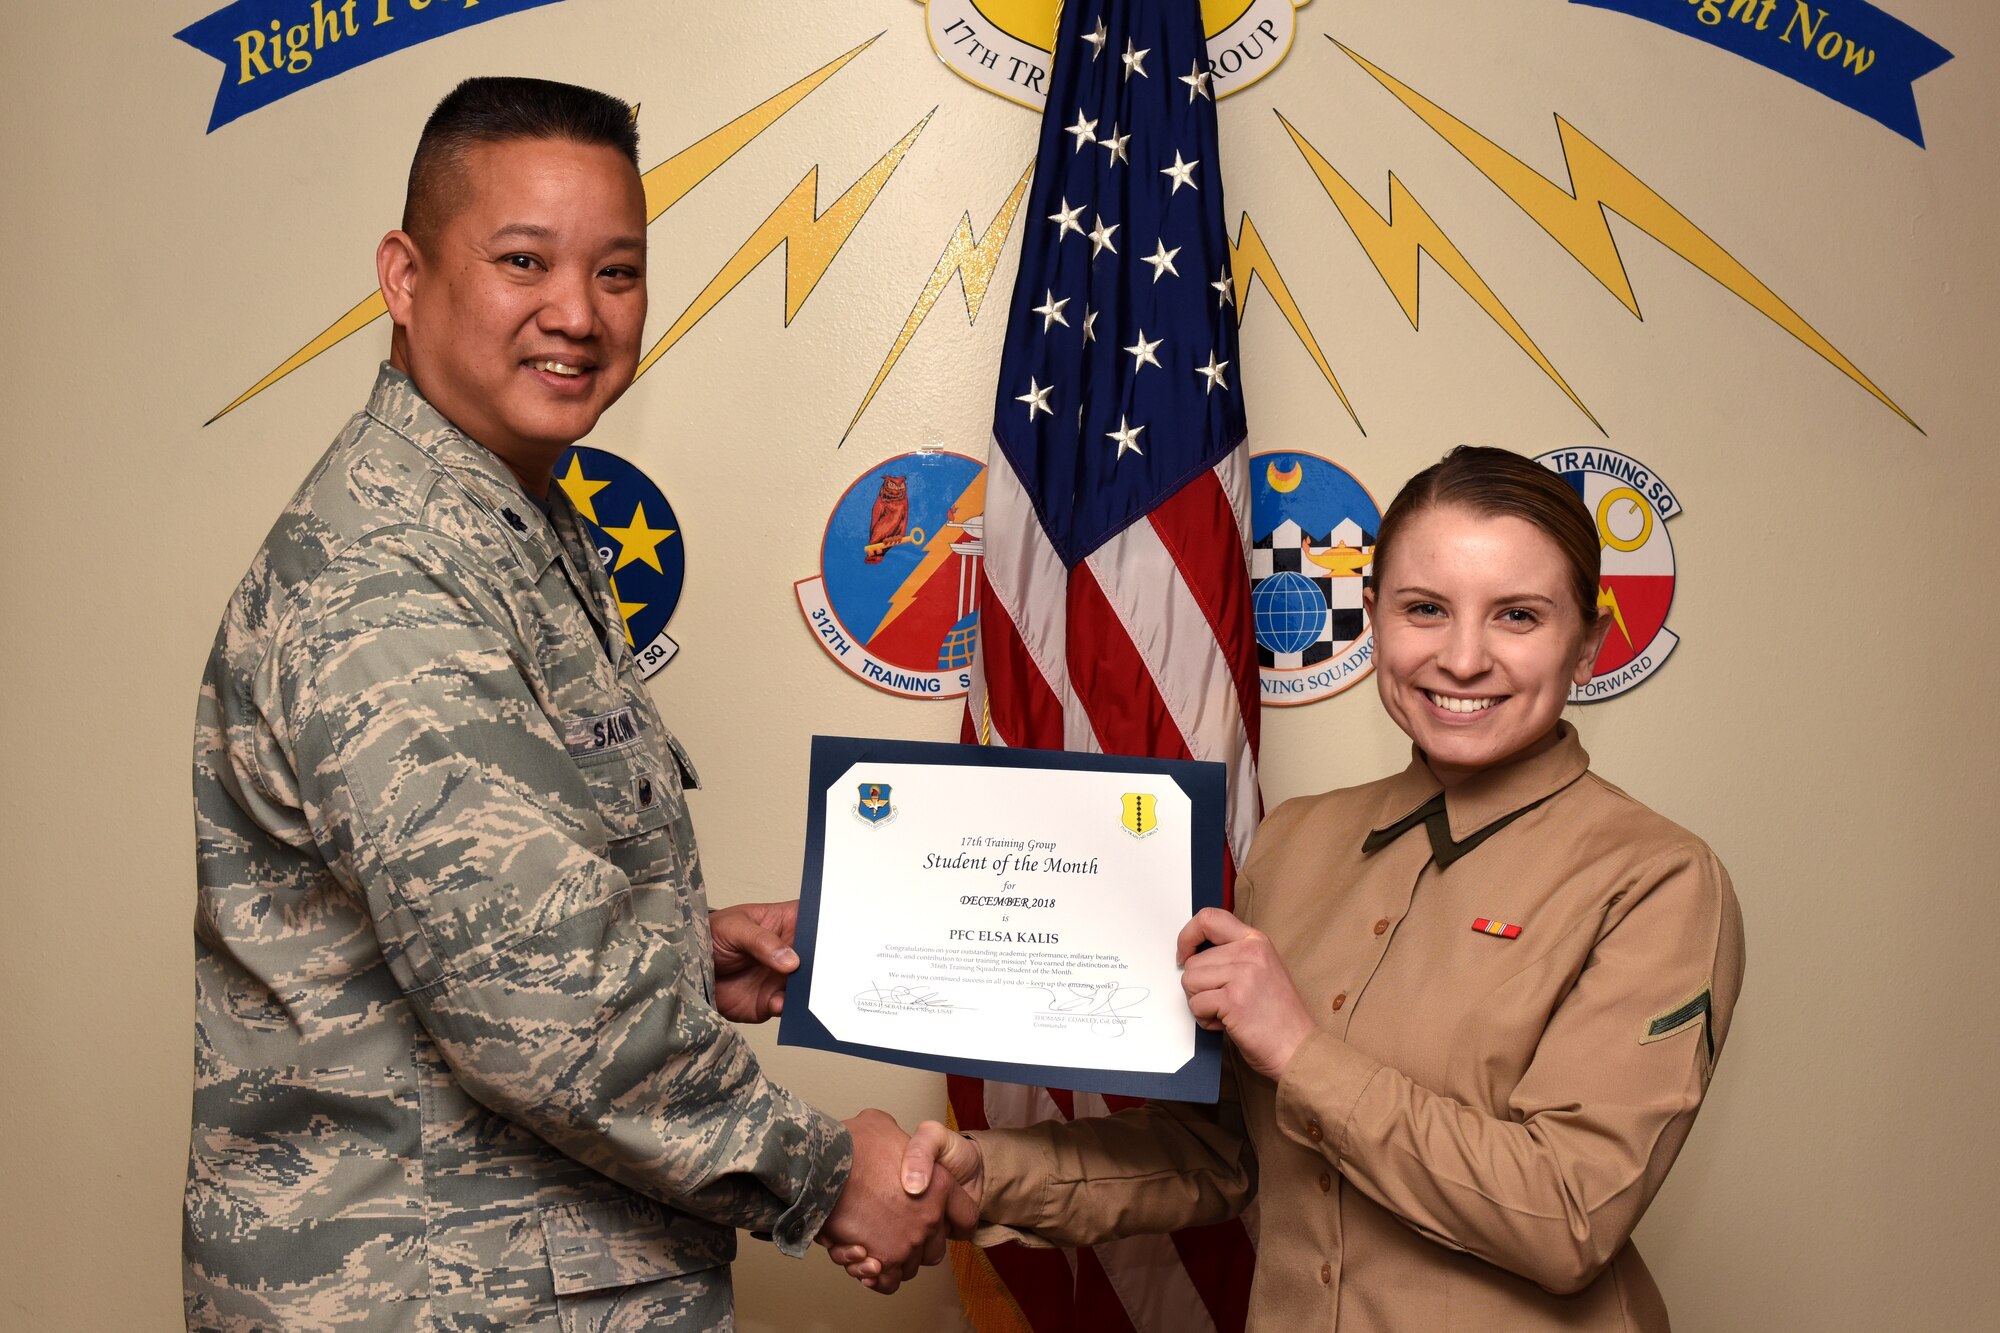 U.S. Air Force Col. Abraham Salomon, 17th Training Group deputy commander, presents the 316th Training Squadron Student of the Month award to U.S. Marine Corps. Pfc. Elsa Kalis, 316th TRS student, at the Brandenburg Hall on Goodfellow Air Force Base, Texas, Jan. 4, 2019. The 316th TRS’s mission is to conduct U.S. Air Force, U.S. Army, U.S. Marine Corps, U.S. Navy and U.S. Coast Guard cryptologic, human intelligence and military training. (U.S. Air Force photo by Airman 1st Class Zachary Chapman/Released)